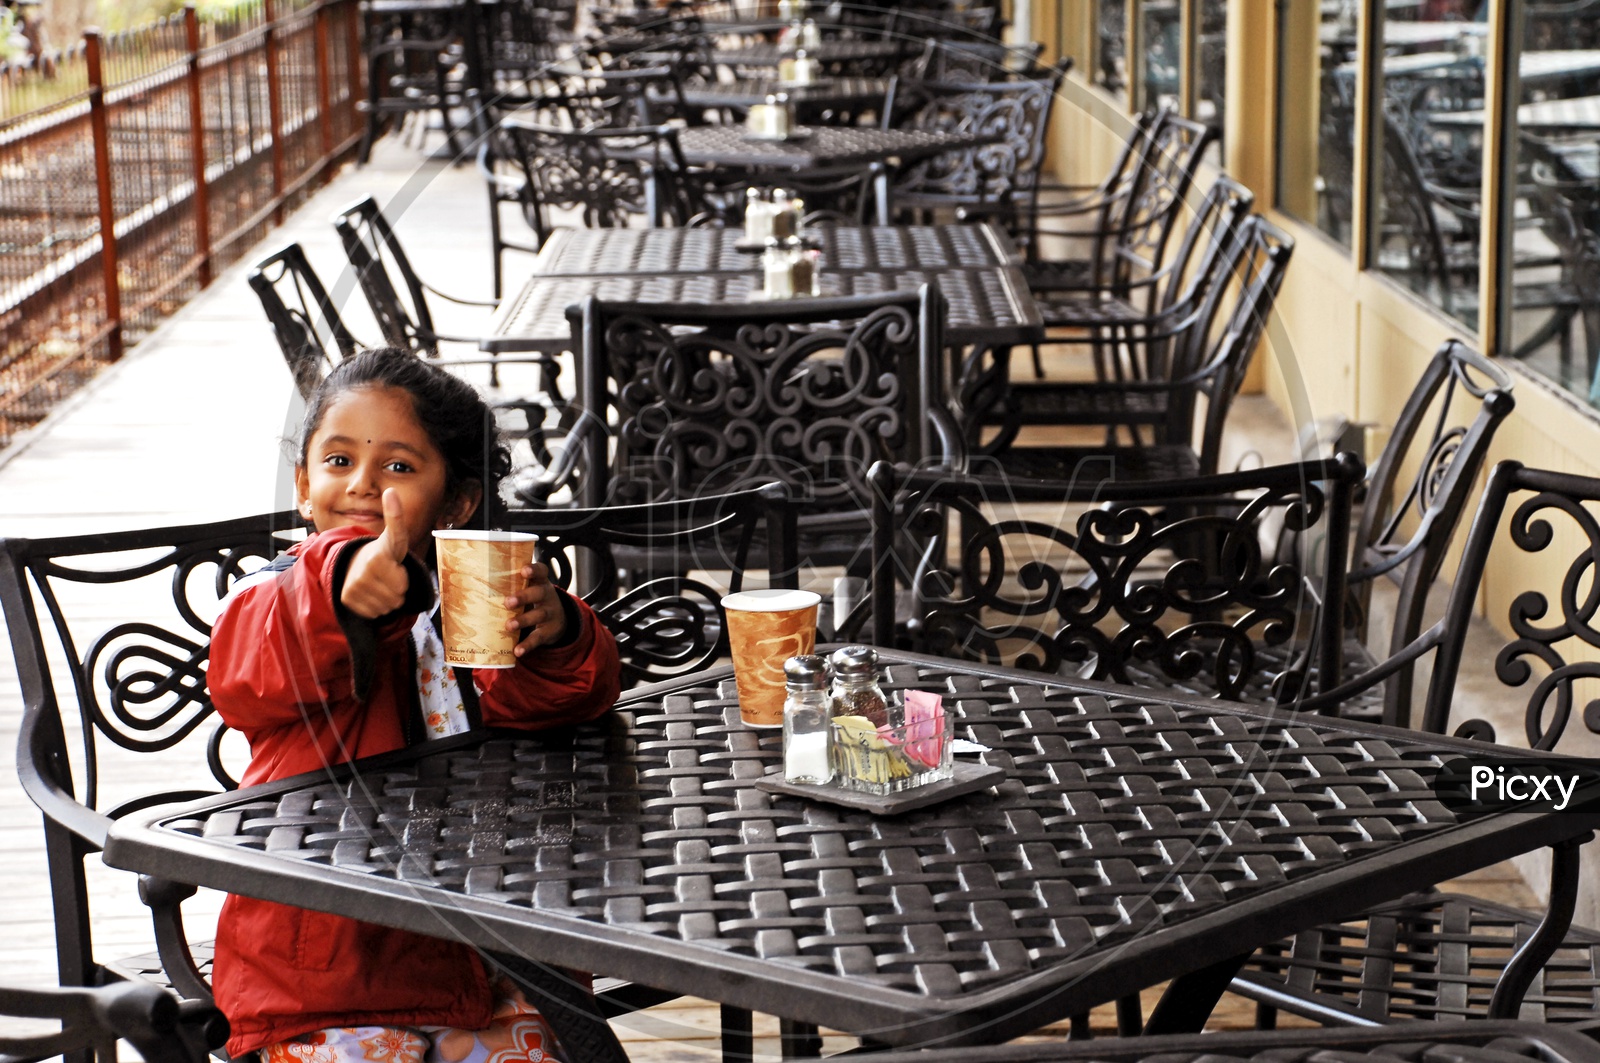 Indian little girl sitting in a cafe